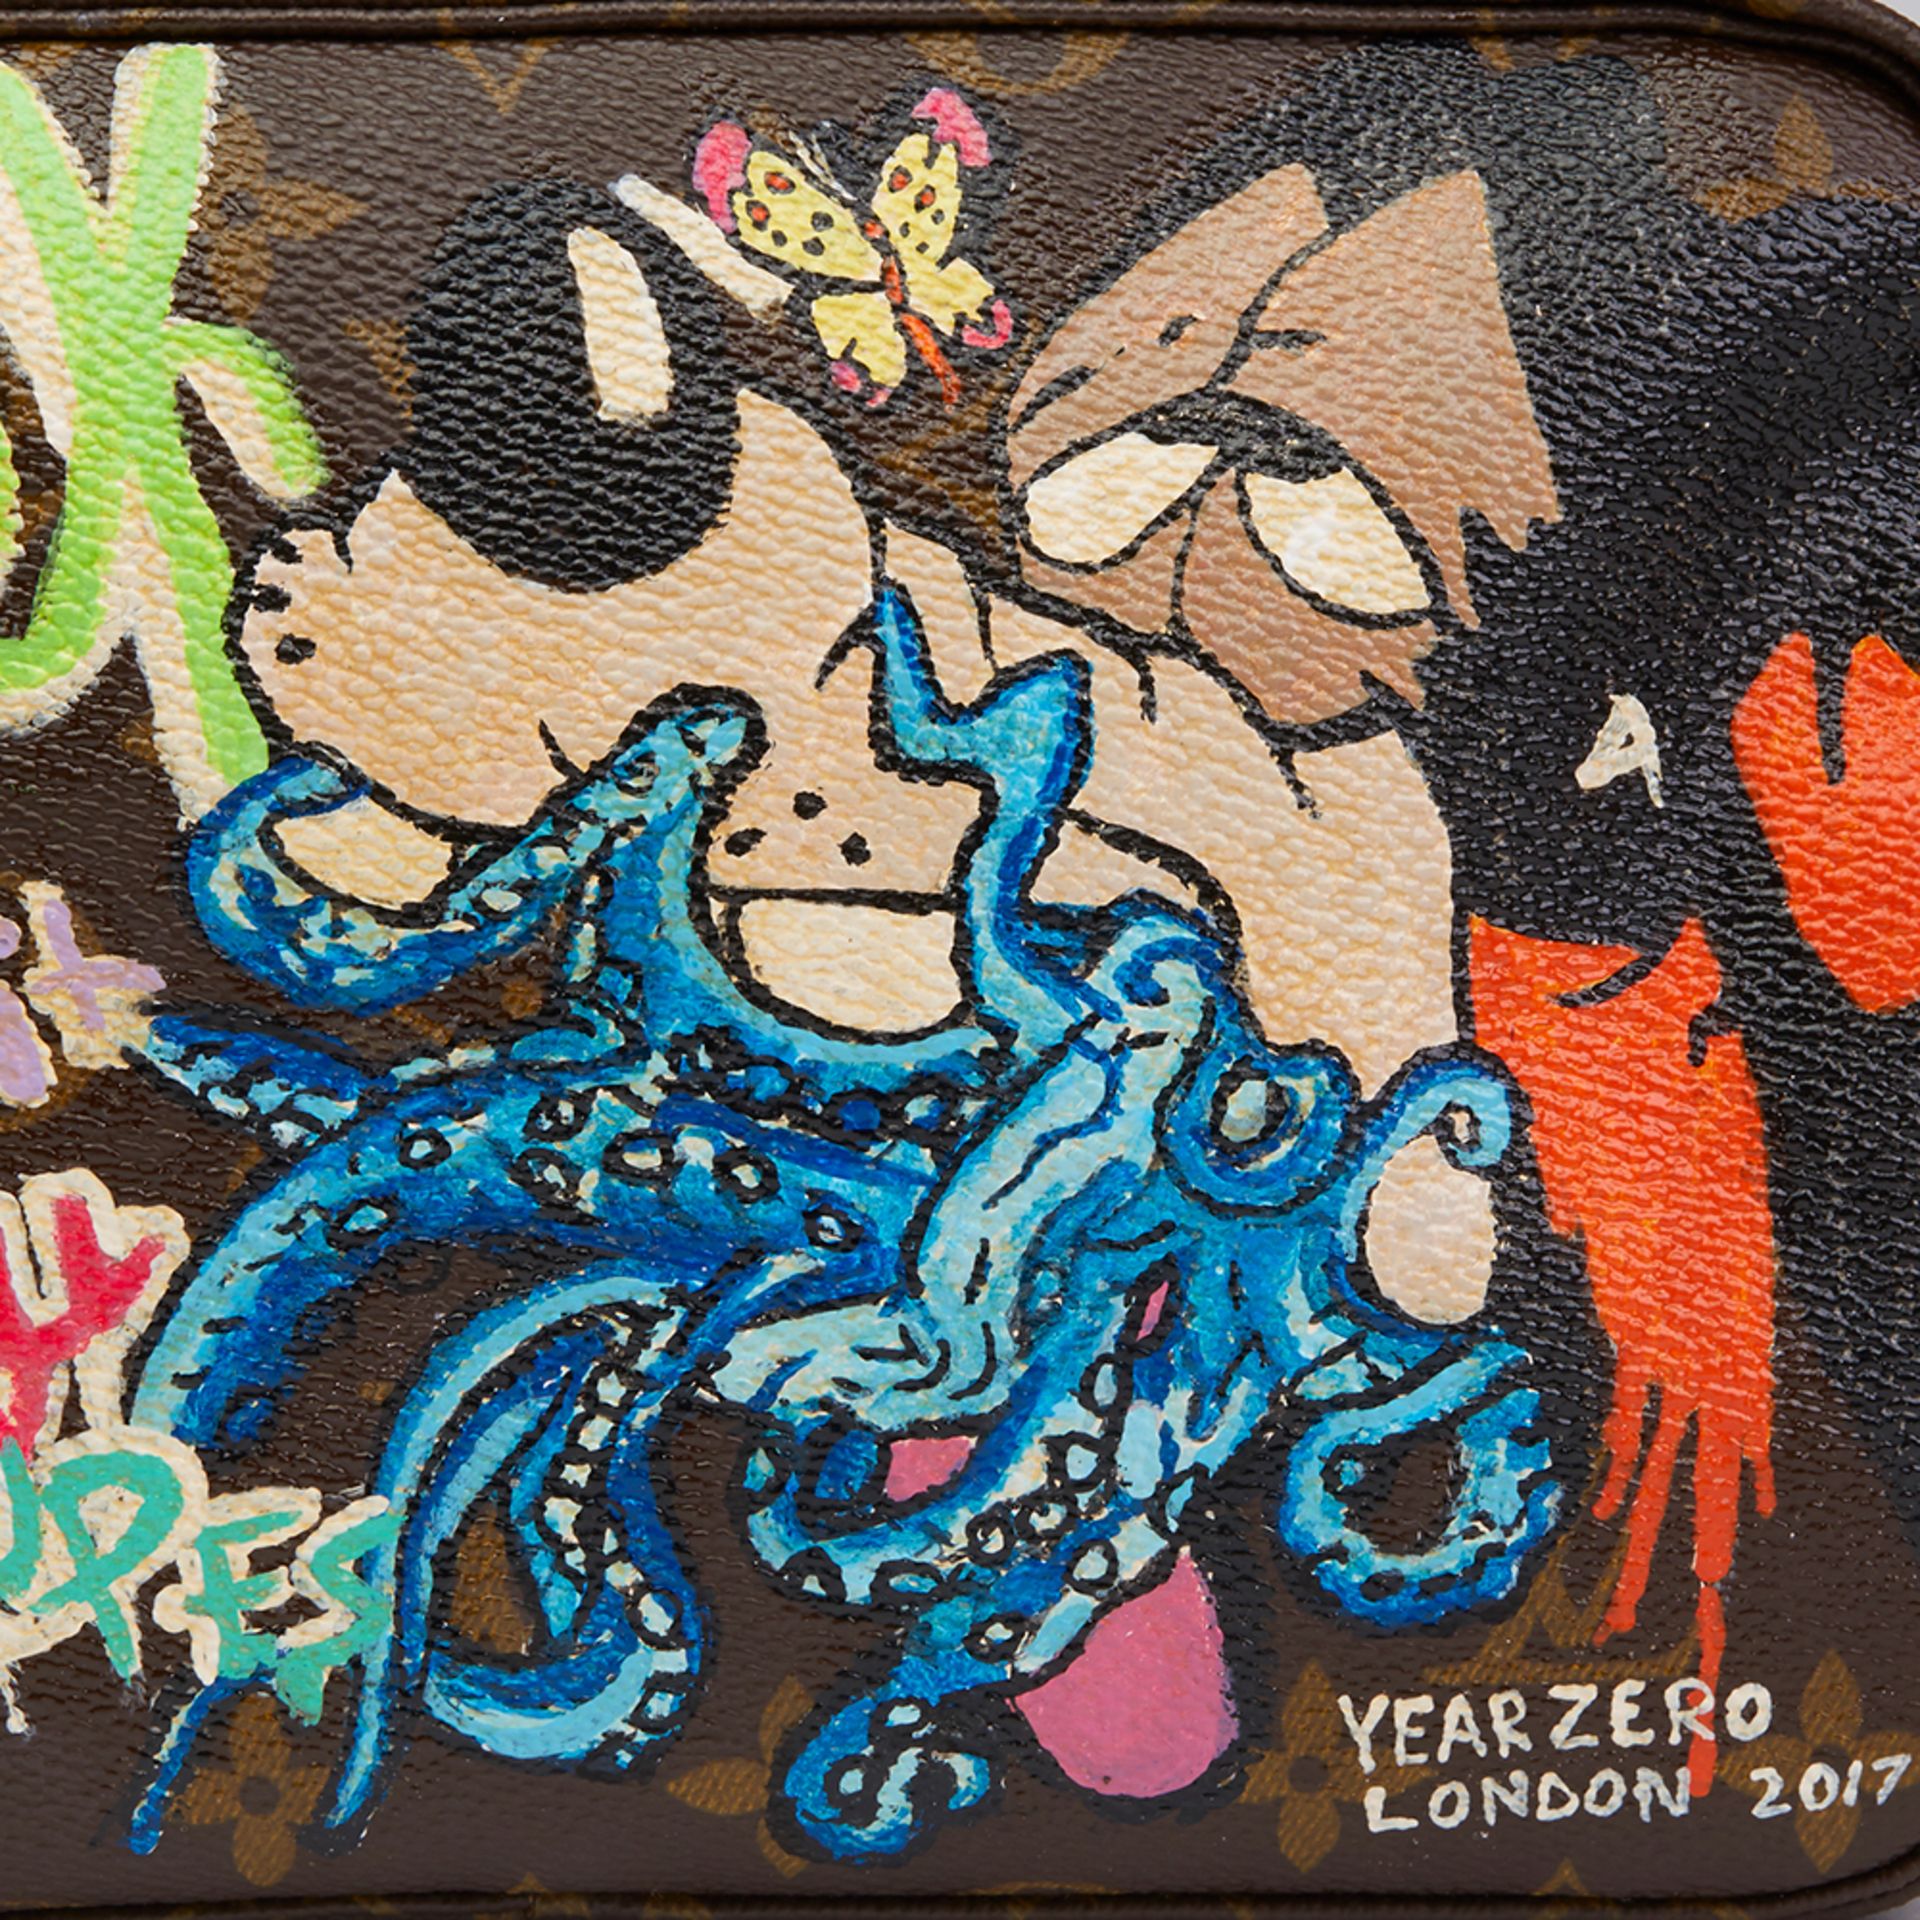 Louis Vuitton Hand-painted 'Sick of it all' X Year Zero London Toiletry Pouch - Image 11 of 11